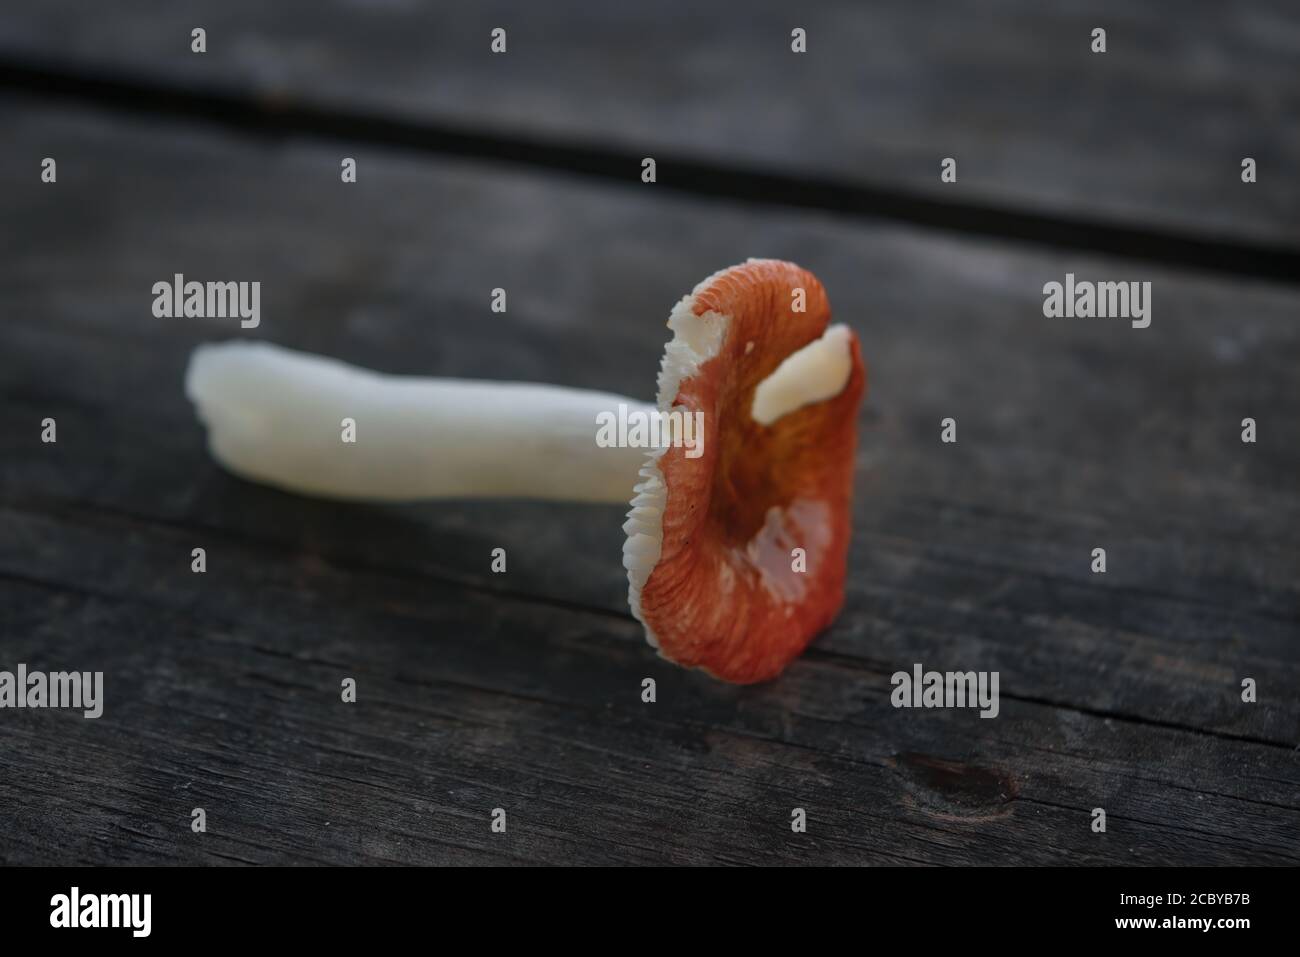 Russula mushrooms on the background of an old wooden table. Stock Photo